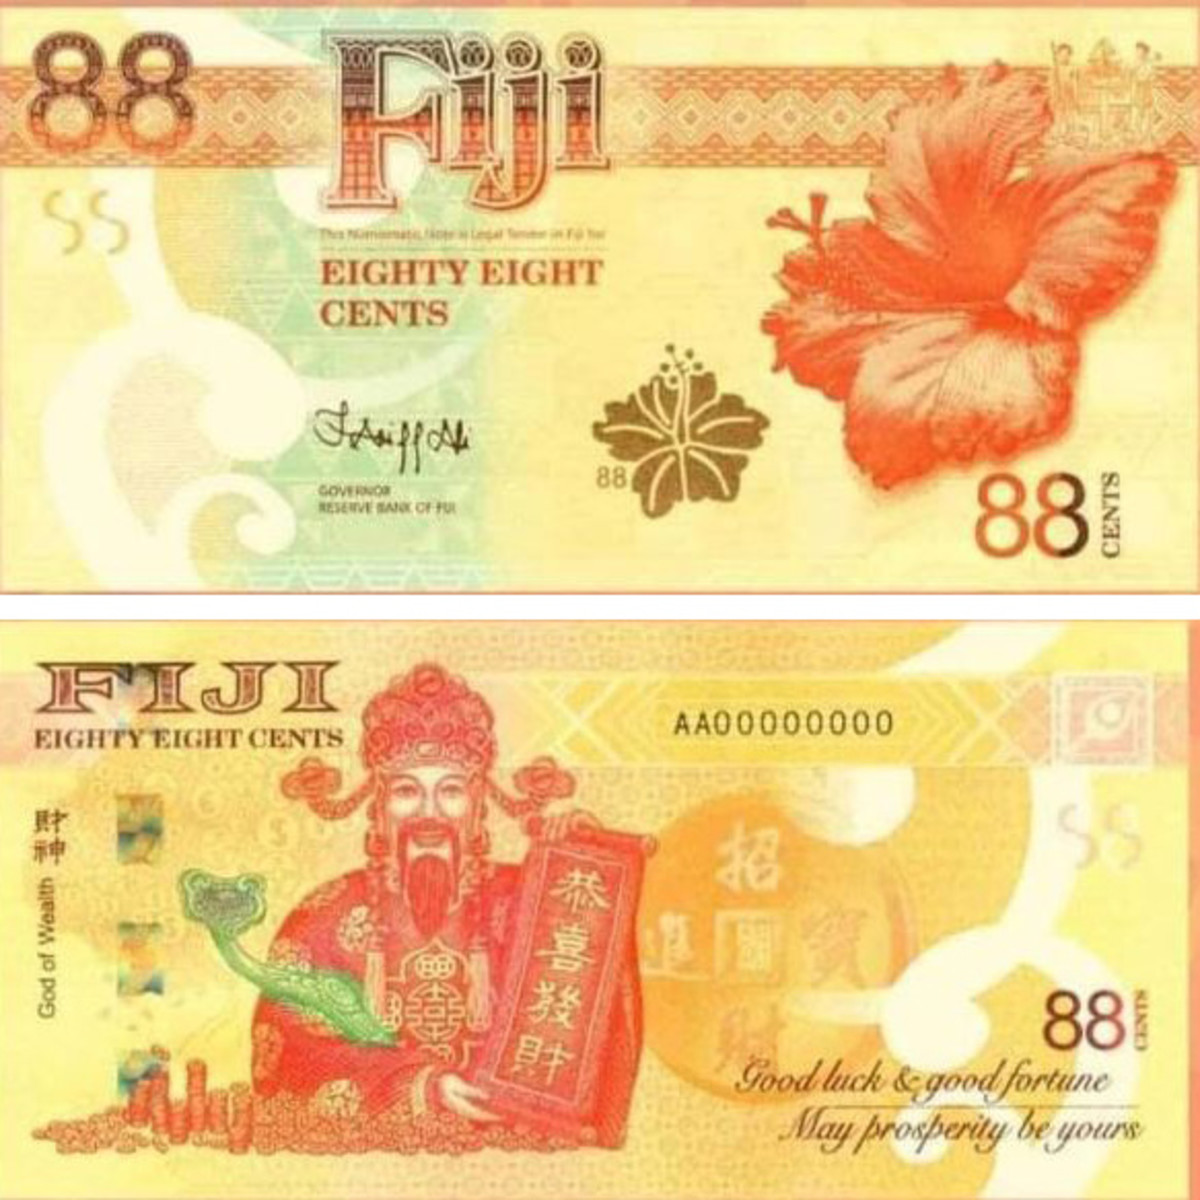 Fiji’s confusing coin and bank note issues are becoming the target of scammers.